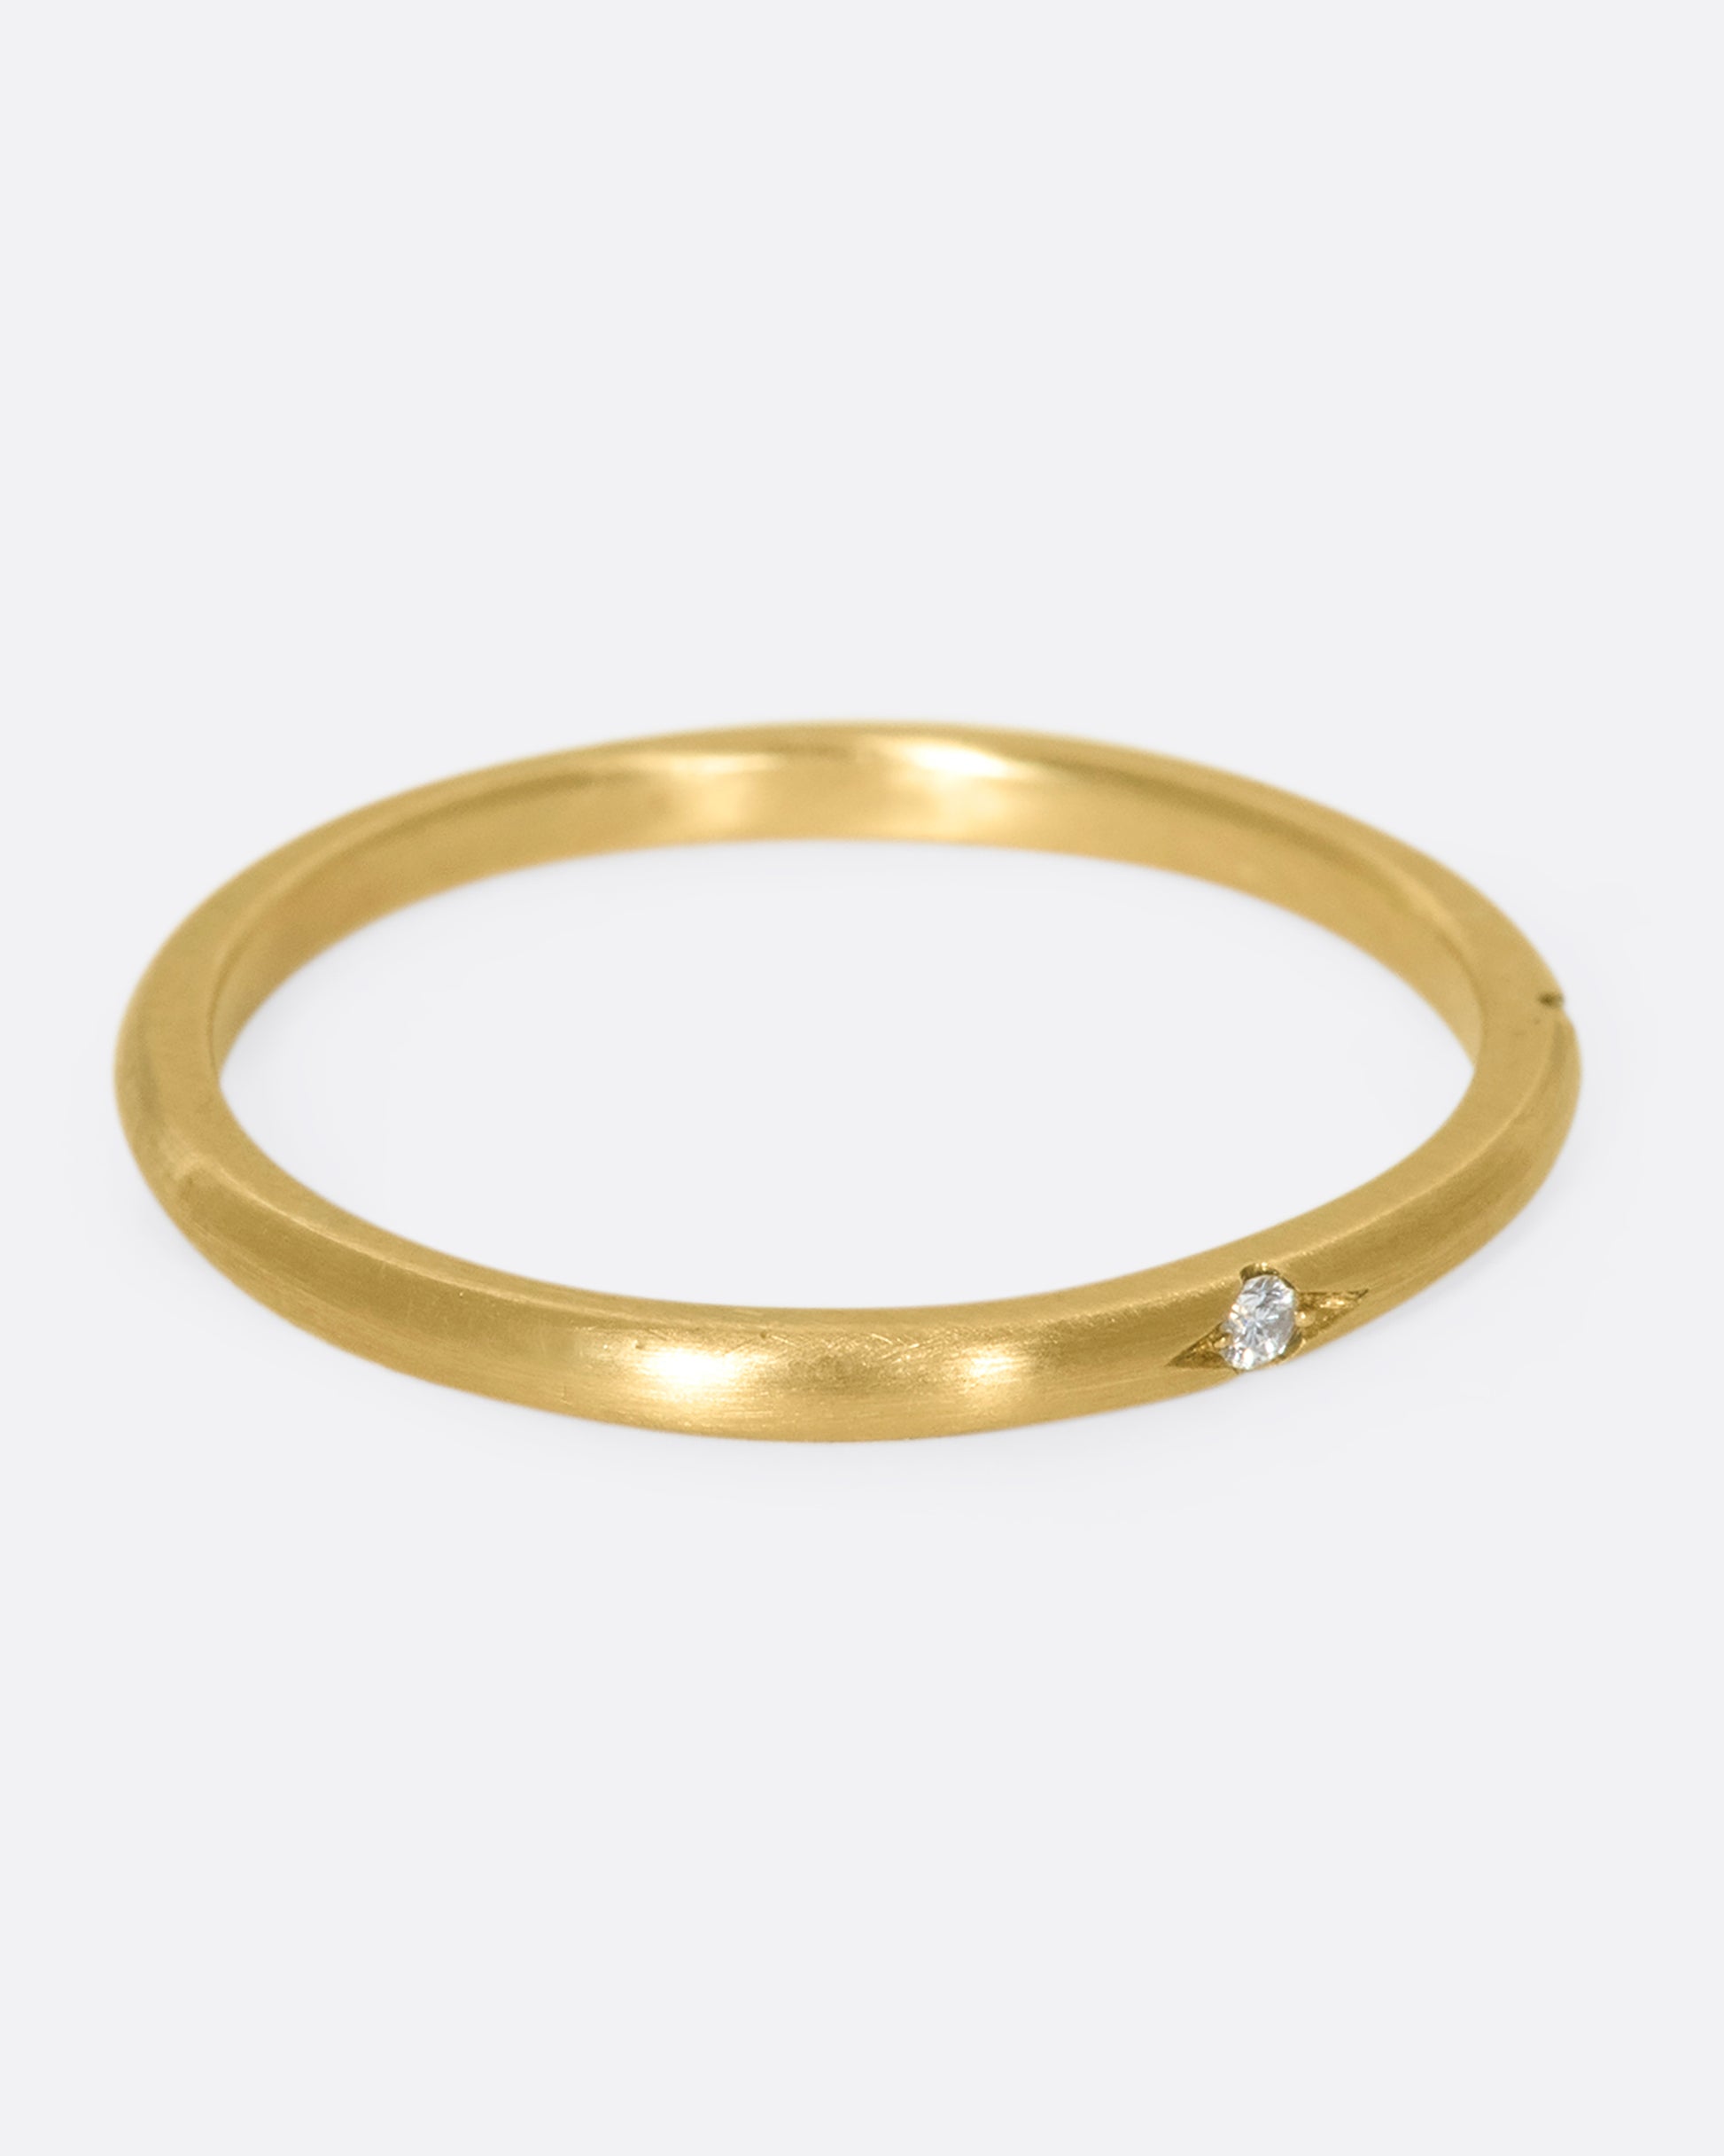 This 10k gold stacking ring features two flush-set white diamonds that sink into the soft gold band